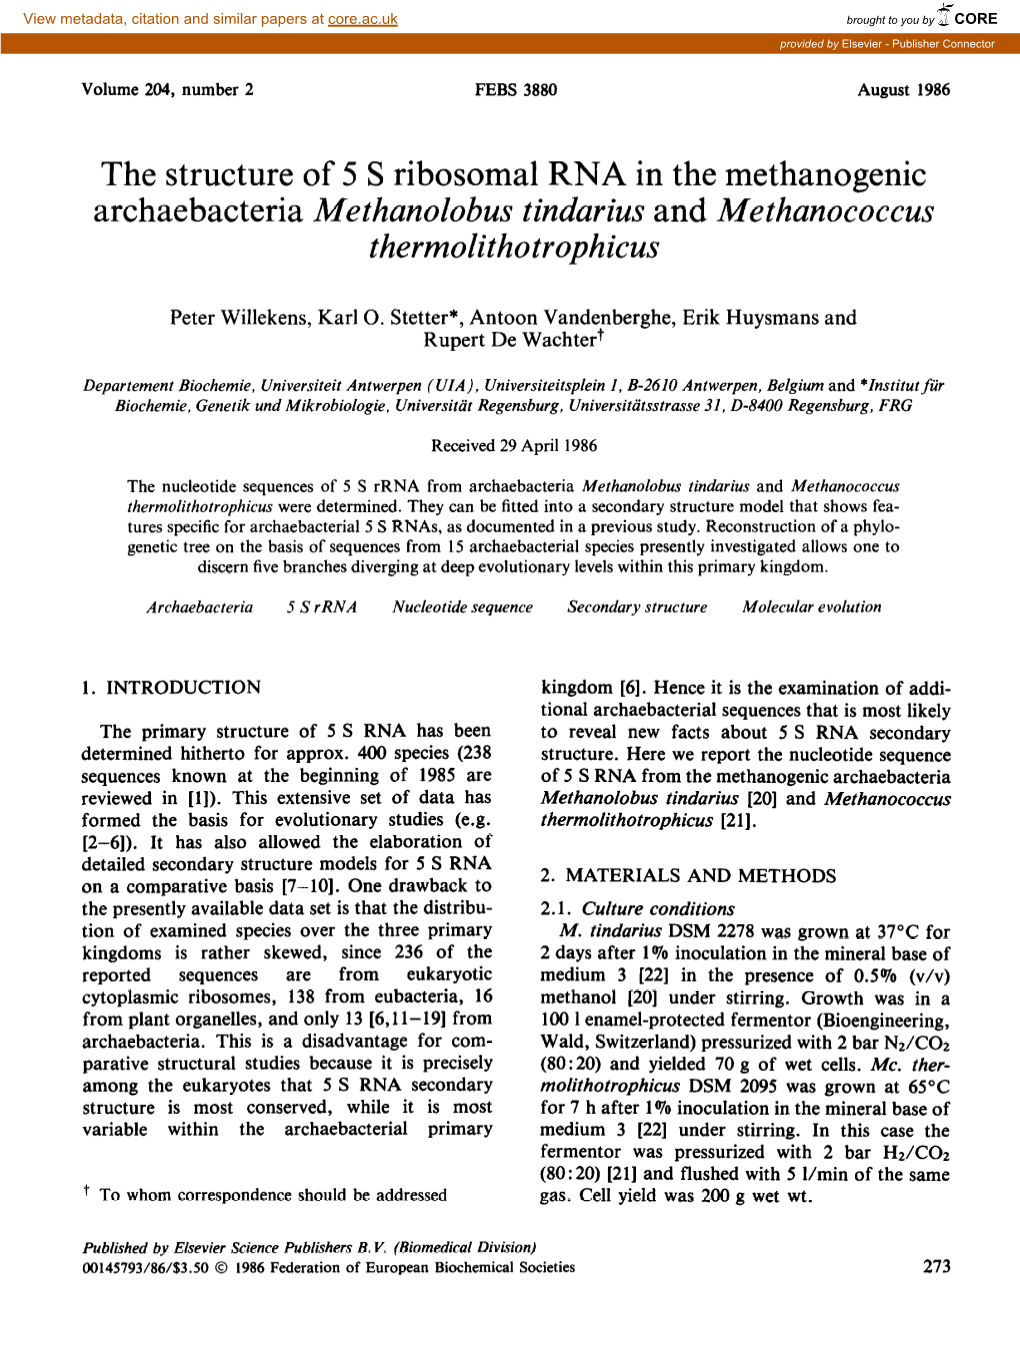 The Structure of 5 S Ribosomal RNA in the Methanogenic Archaebacteria Methanolobus Tindarius and Methanococcus Thermolithotrophicus